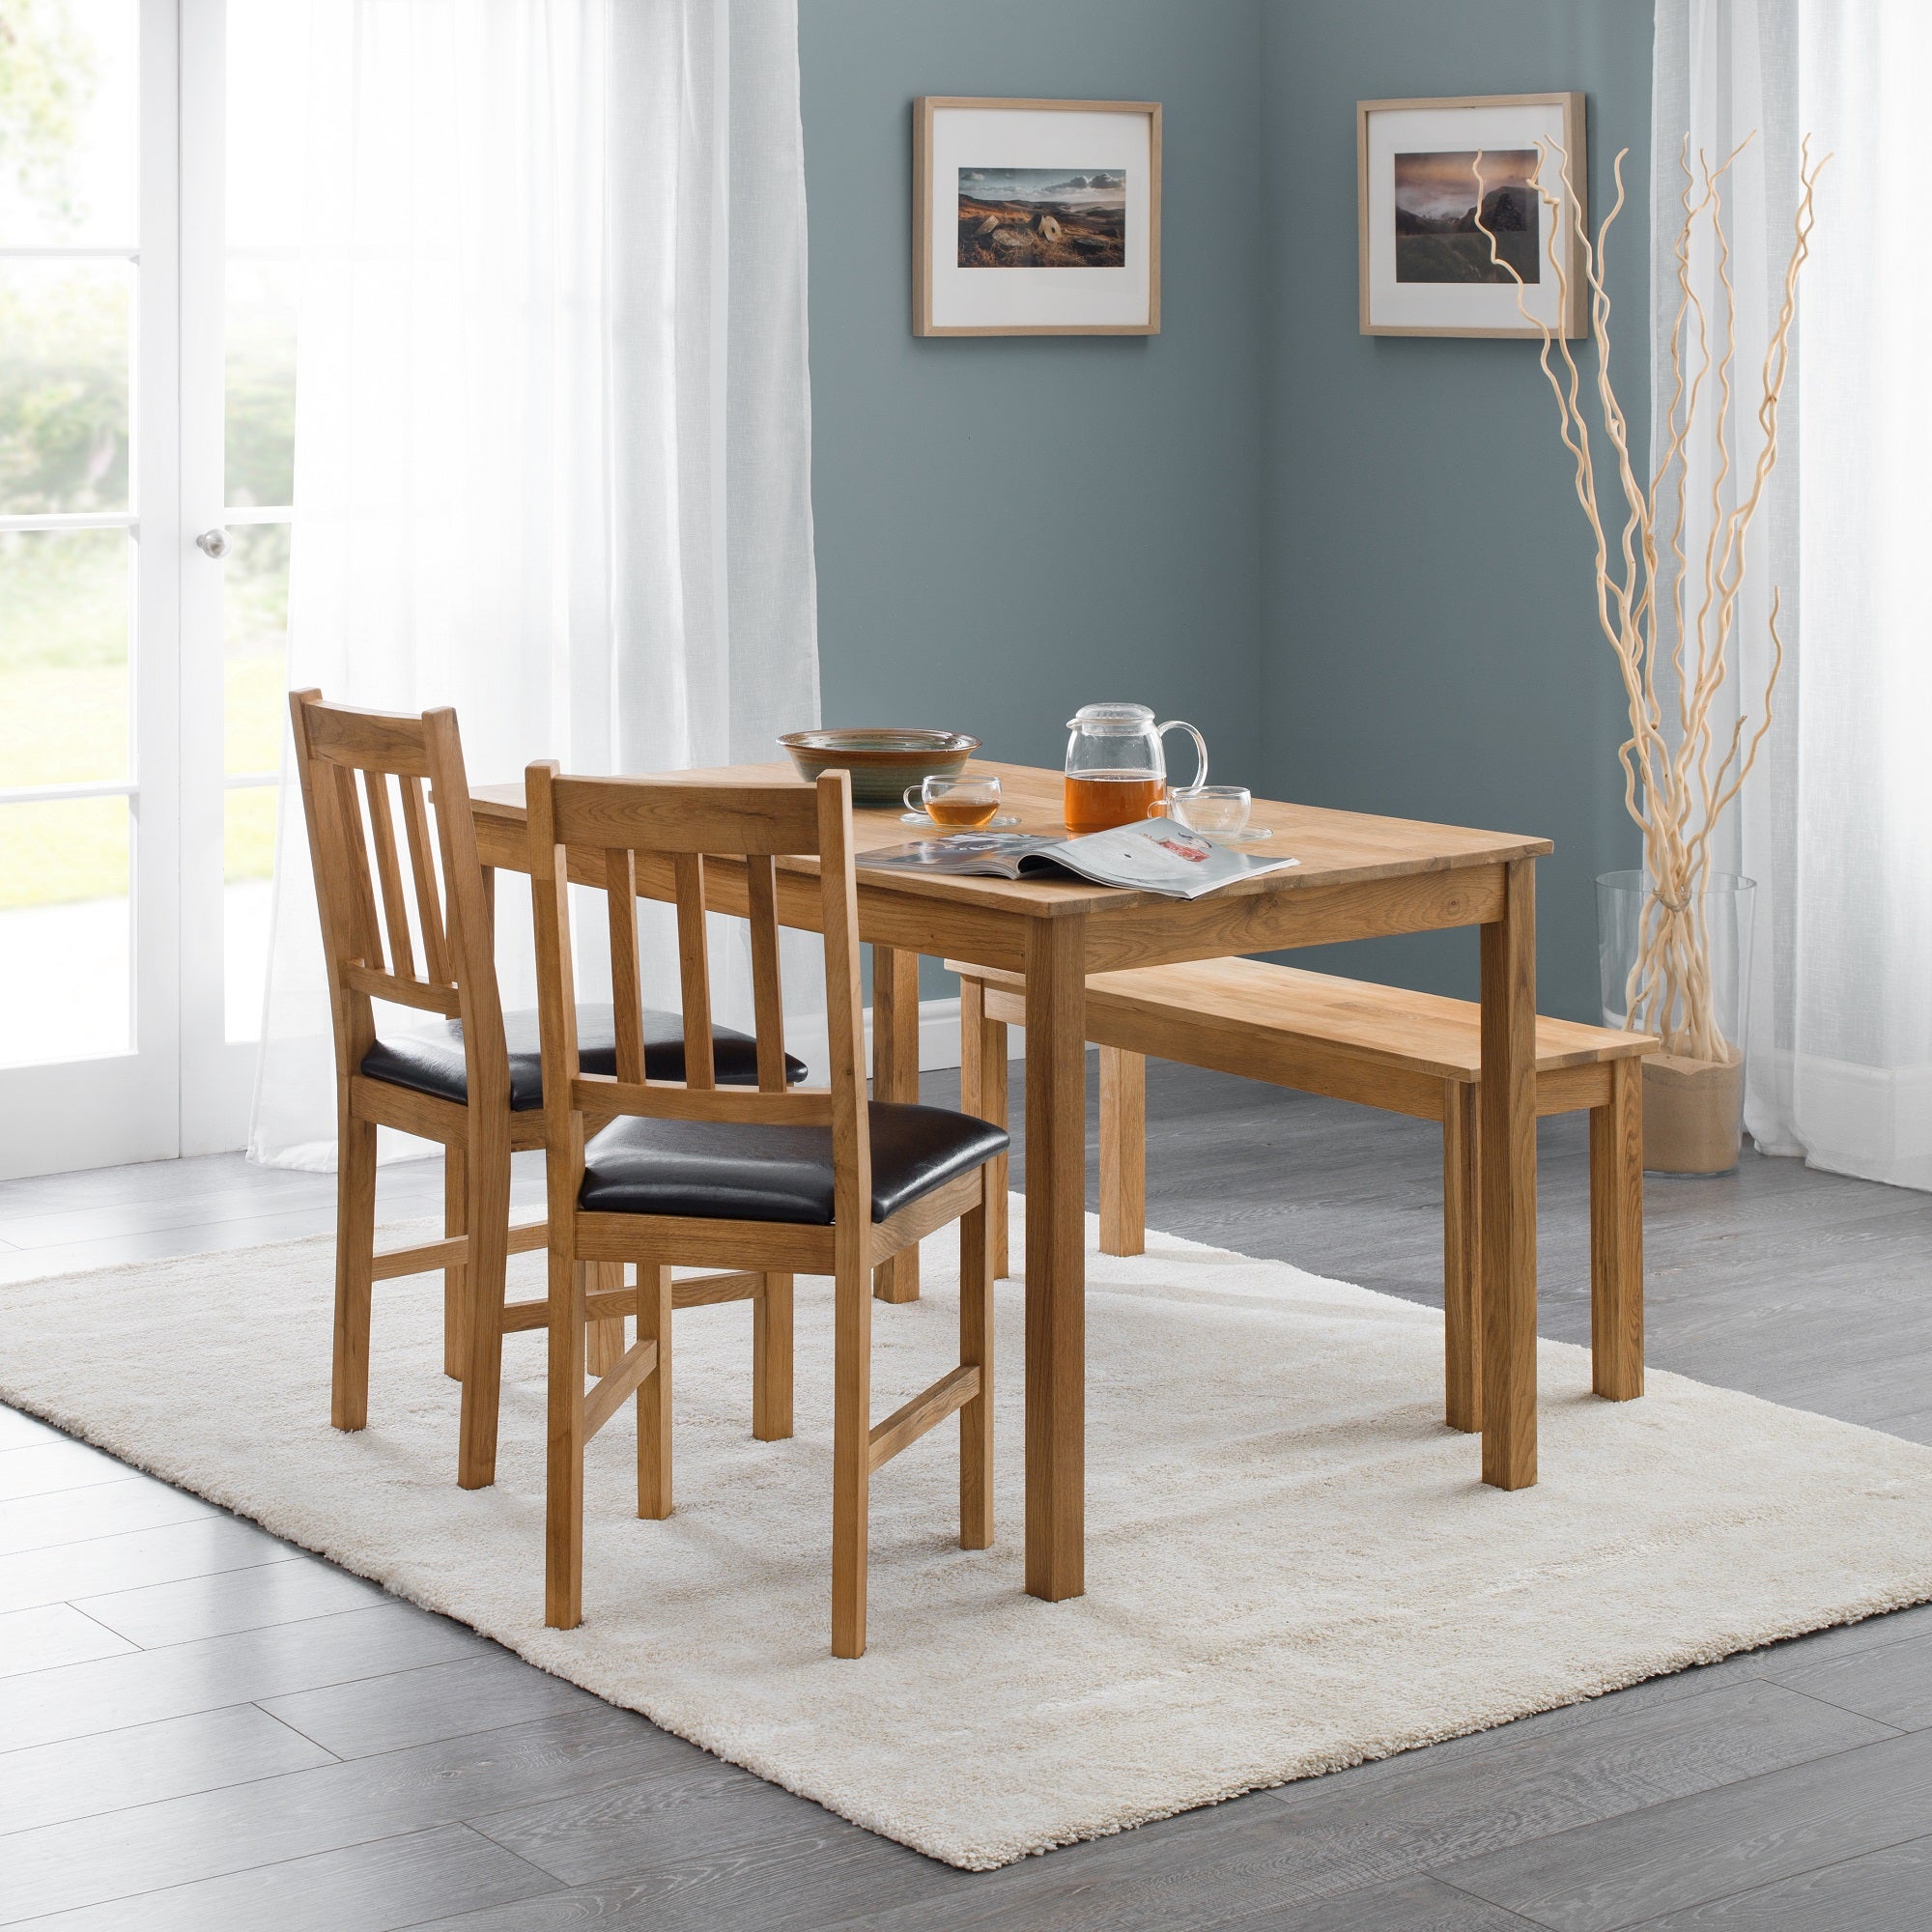 Coxmoor 4 Seater Rectangular Dining Table, Off White Solid Oak